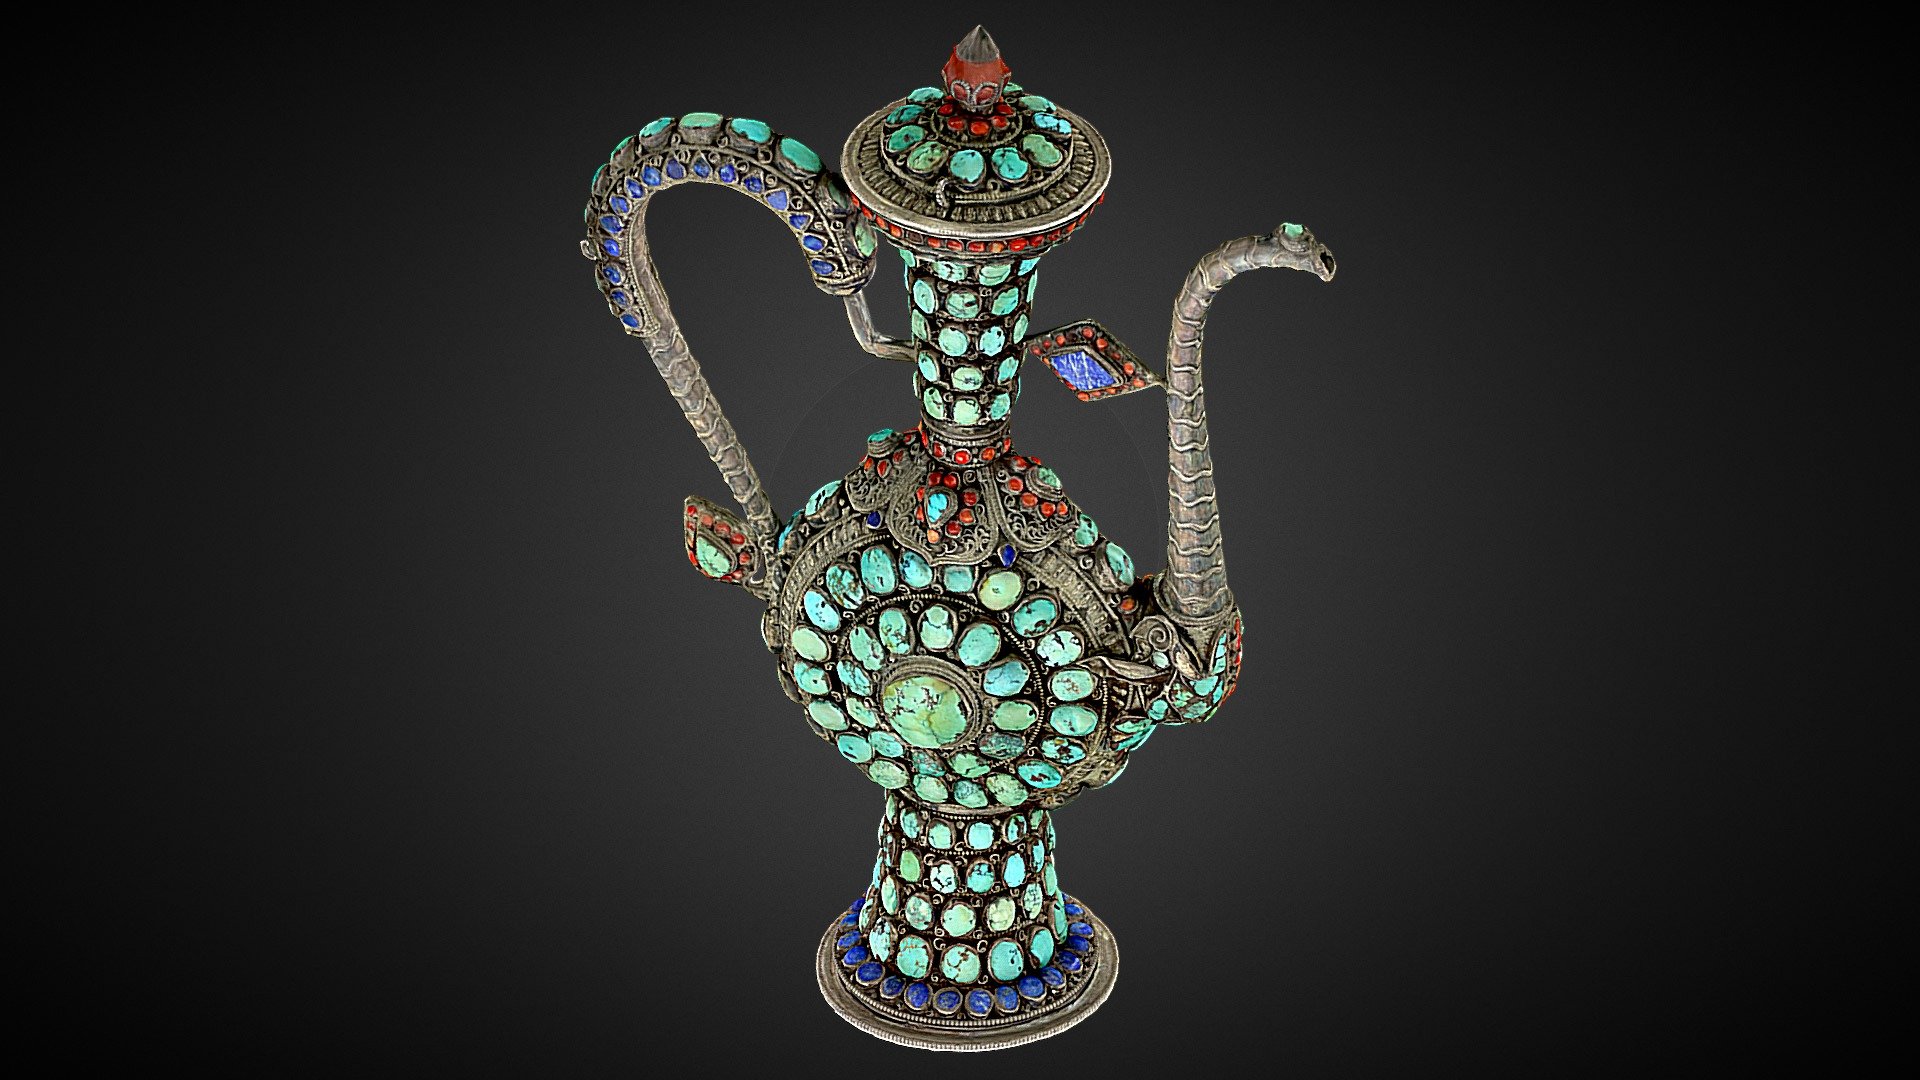 An antique teapot made from Mongolian silver and adorned with turquoise, lapis lazuli and red coral.

Created in RealityCapture by Capturing Reality from 962 images 3d model